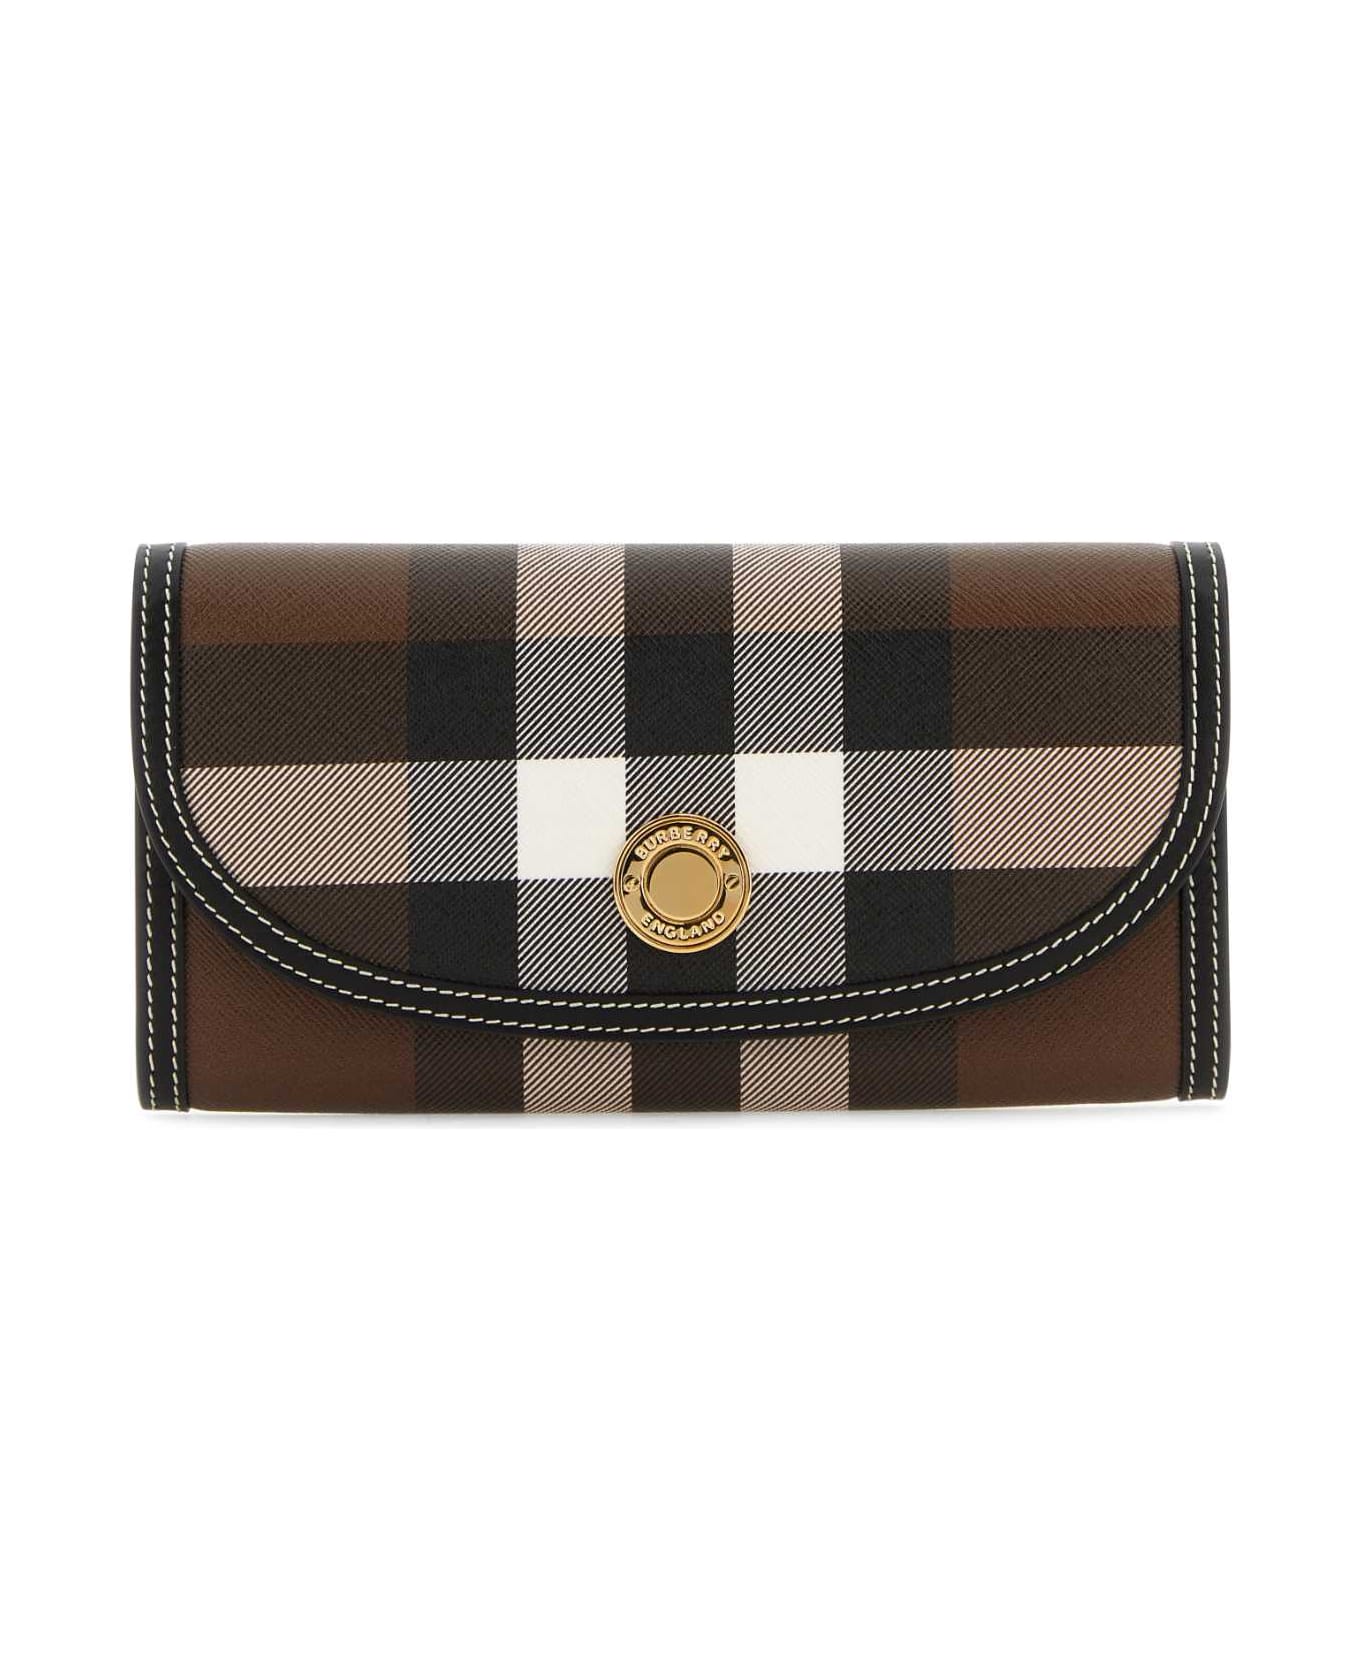 Burberry Printed Canvas And Leather Wallet - DARKBIRCHBROWN